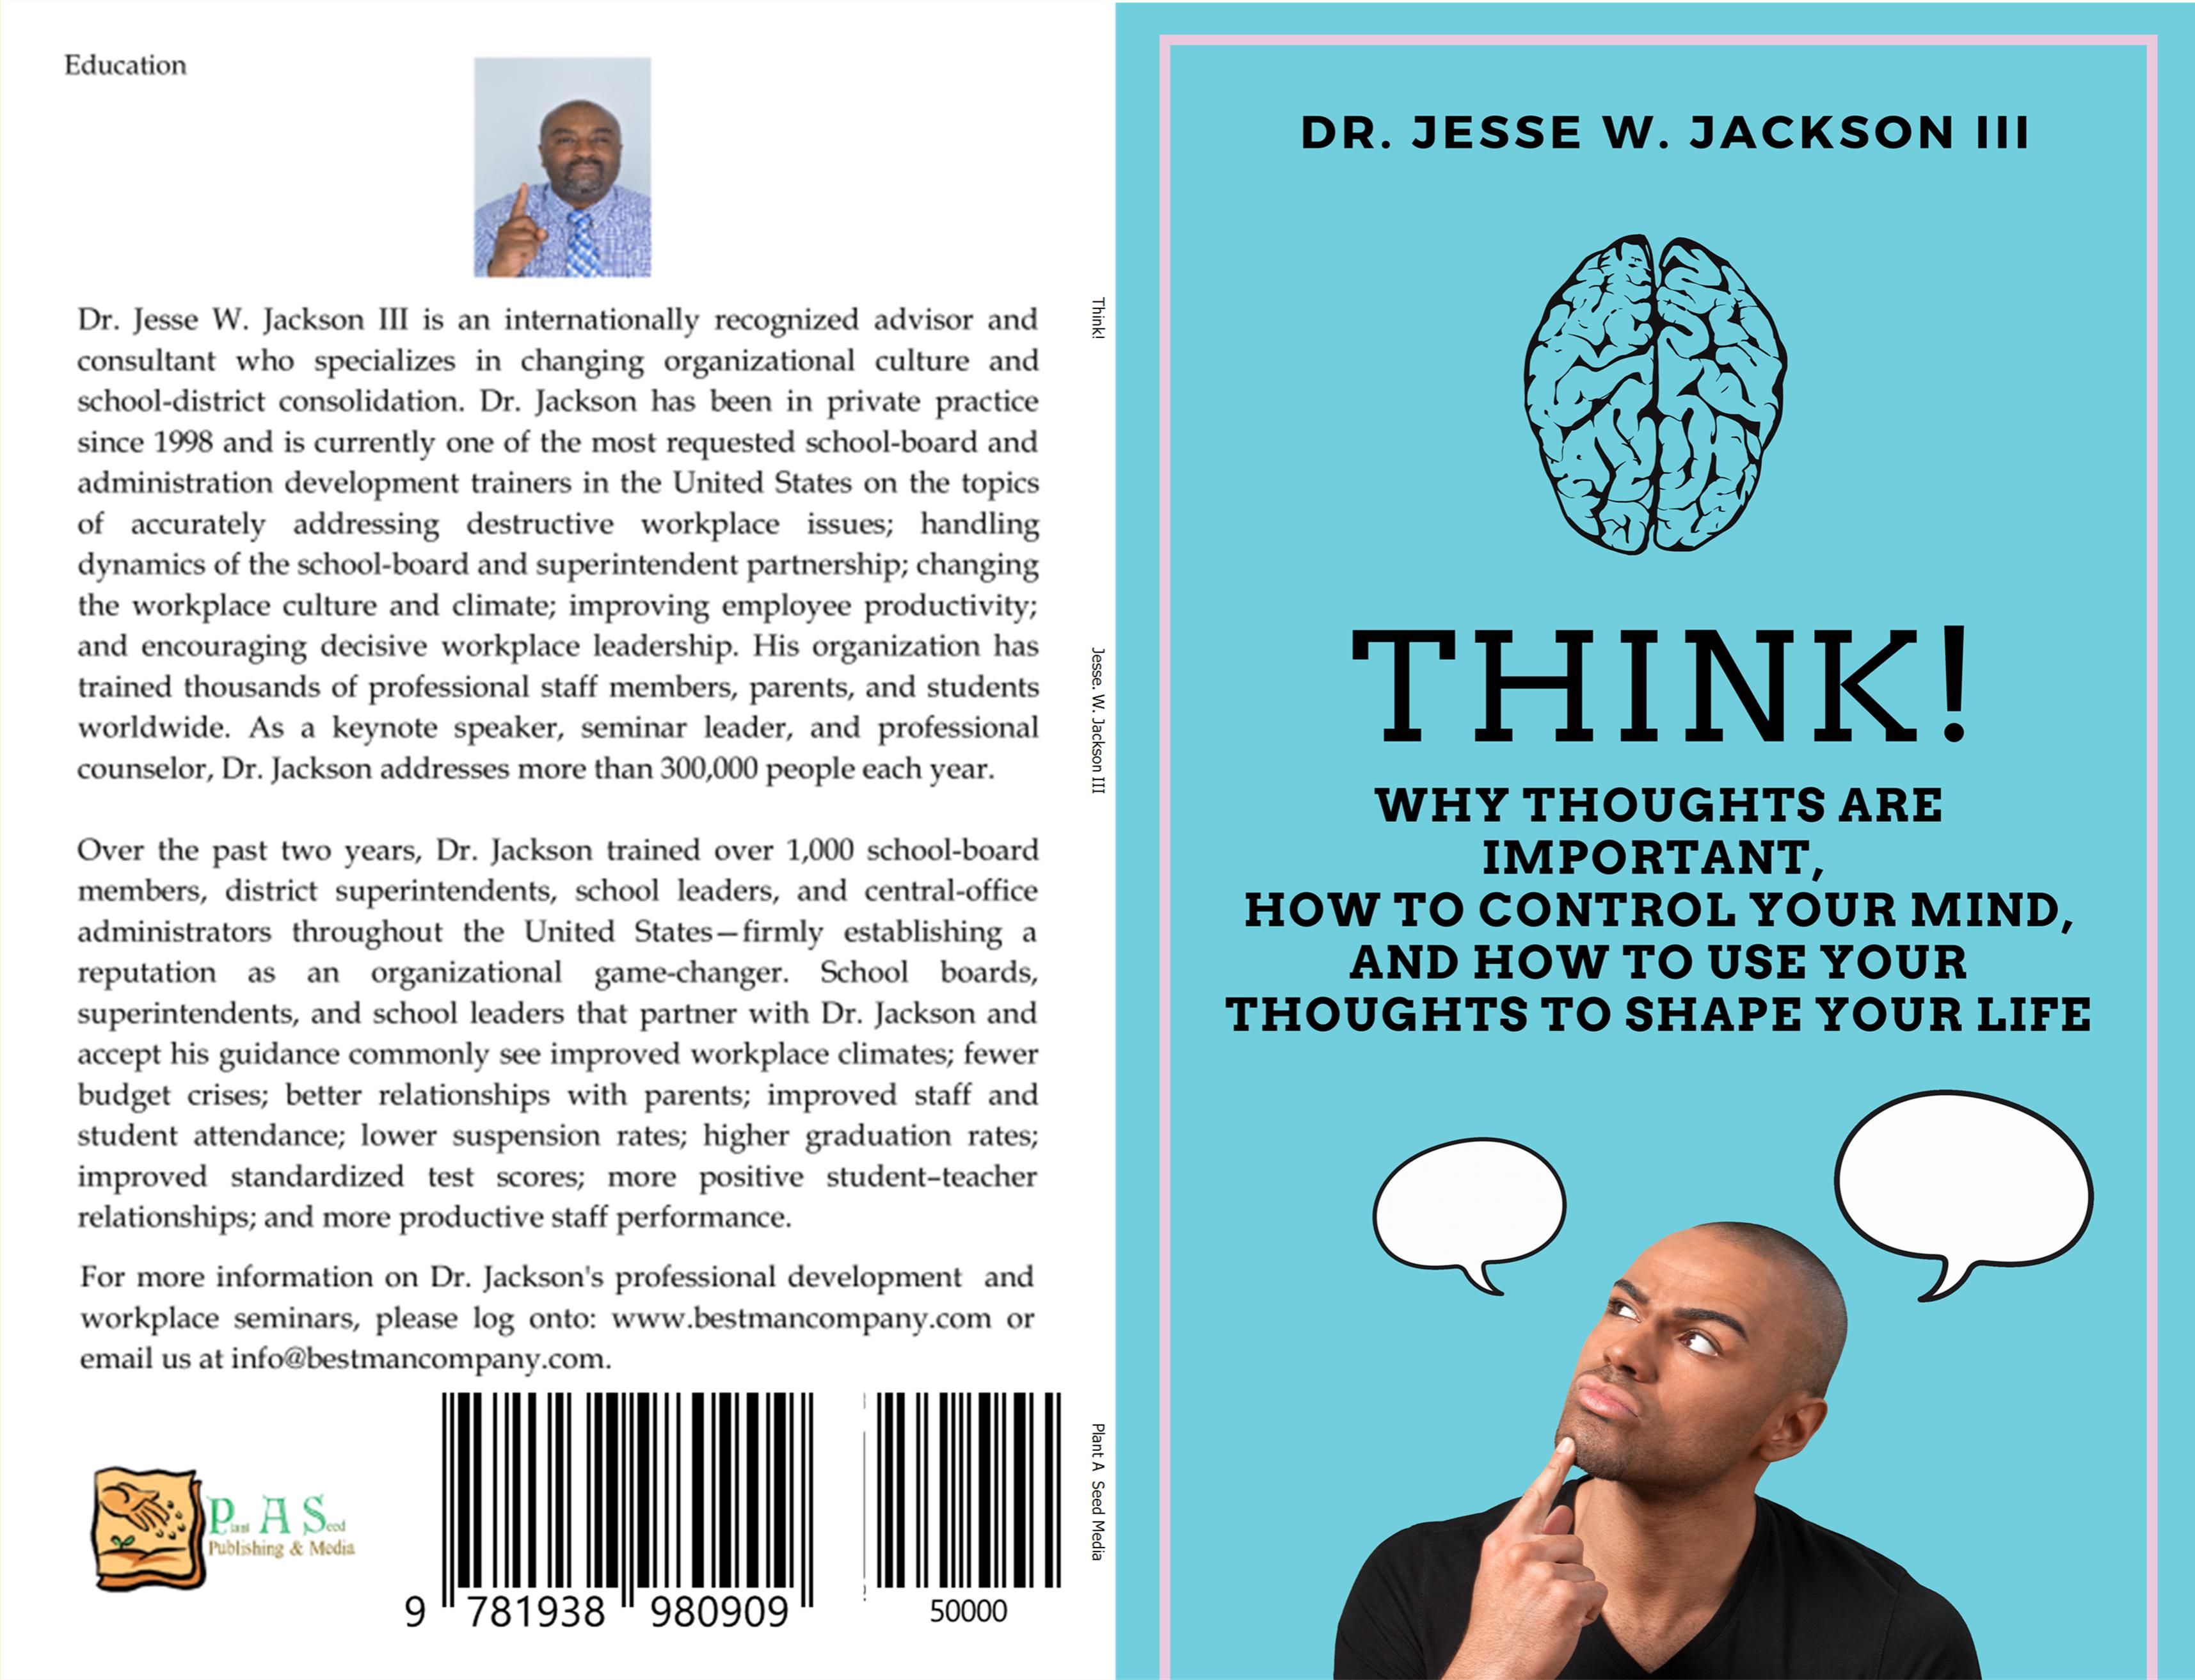 Think! Why Thoughts Are Important, How to Control Your Mind, And How To Use Your Thoughts To Shape Your Life cover image